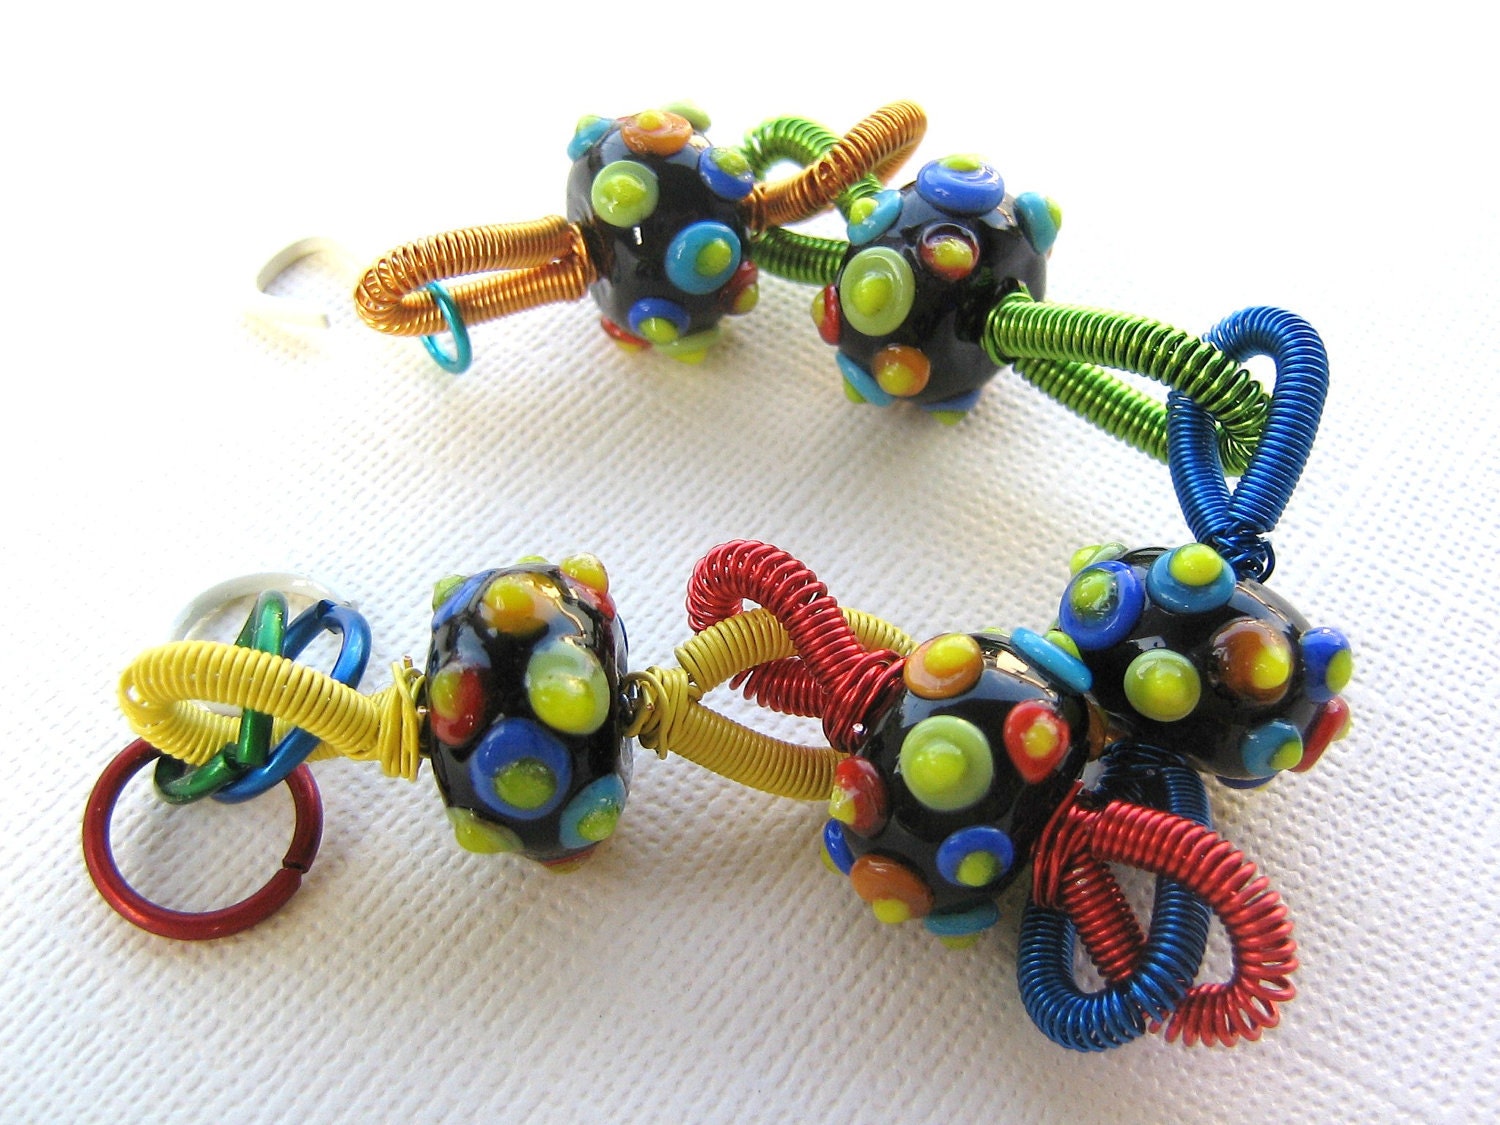 Lolly - Rainbow lampwork bumpies with bright multi-colored coiled wire bracelet - Jenniflair original